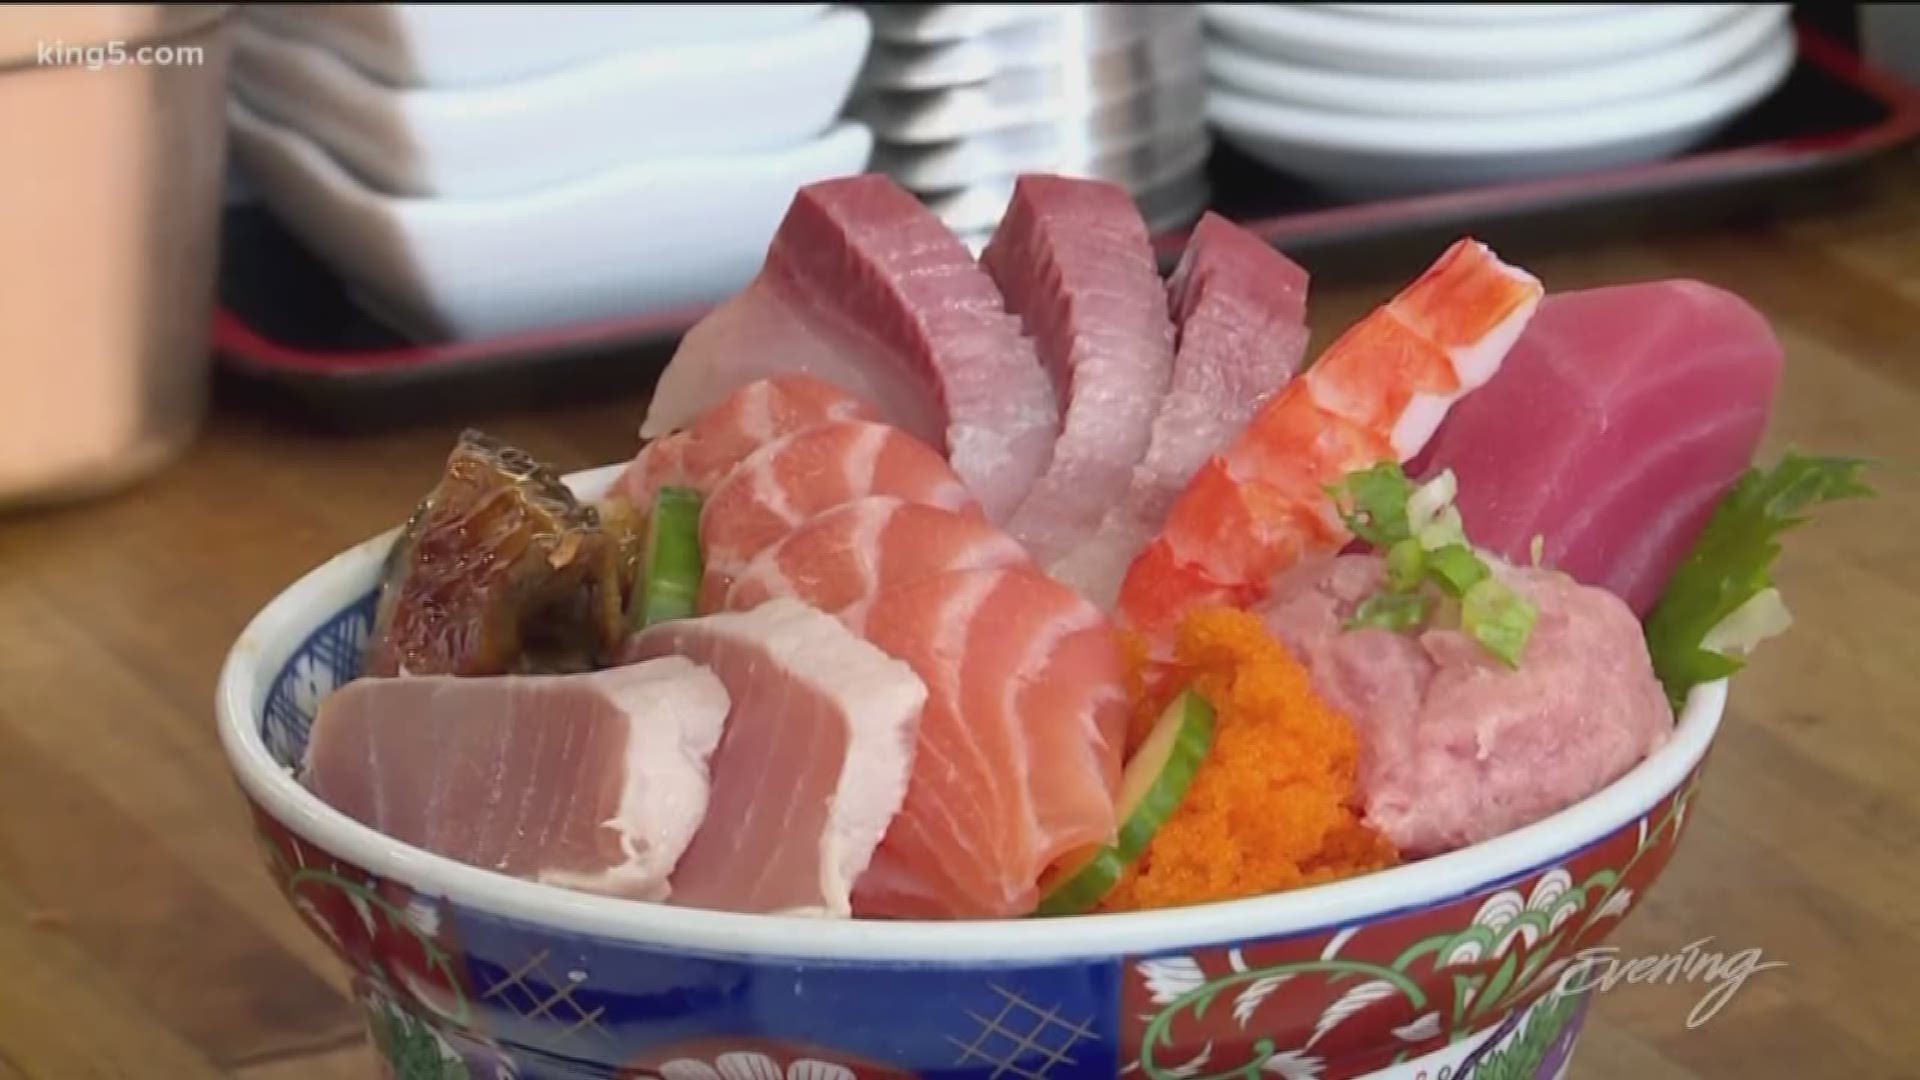 Huge variety, big slices of fresh fish, and a delightful presentation that's easy on the wallet are all reasons to pay a visit to Fremont Bowl.